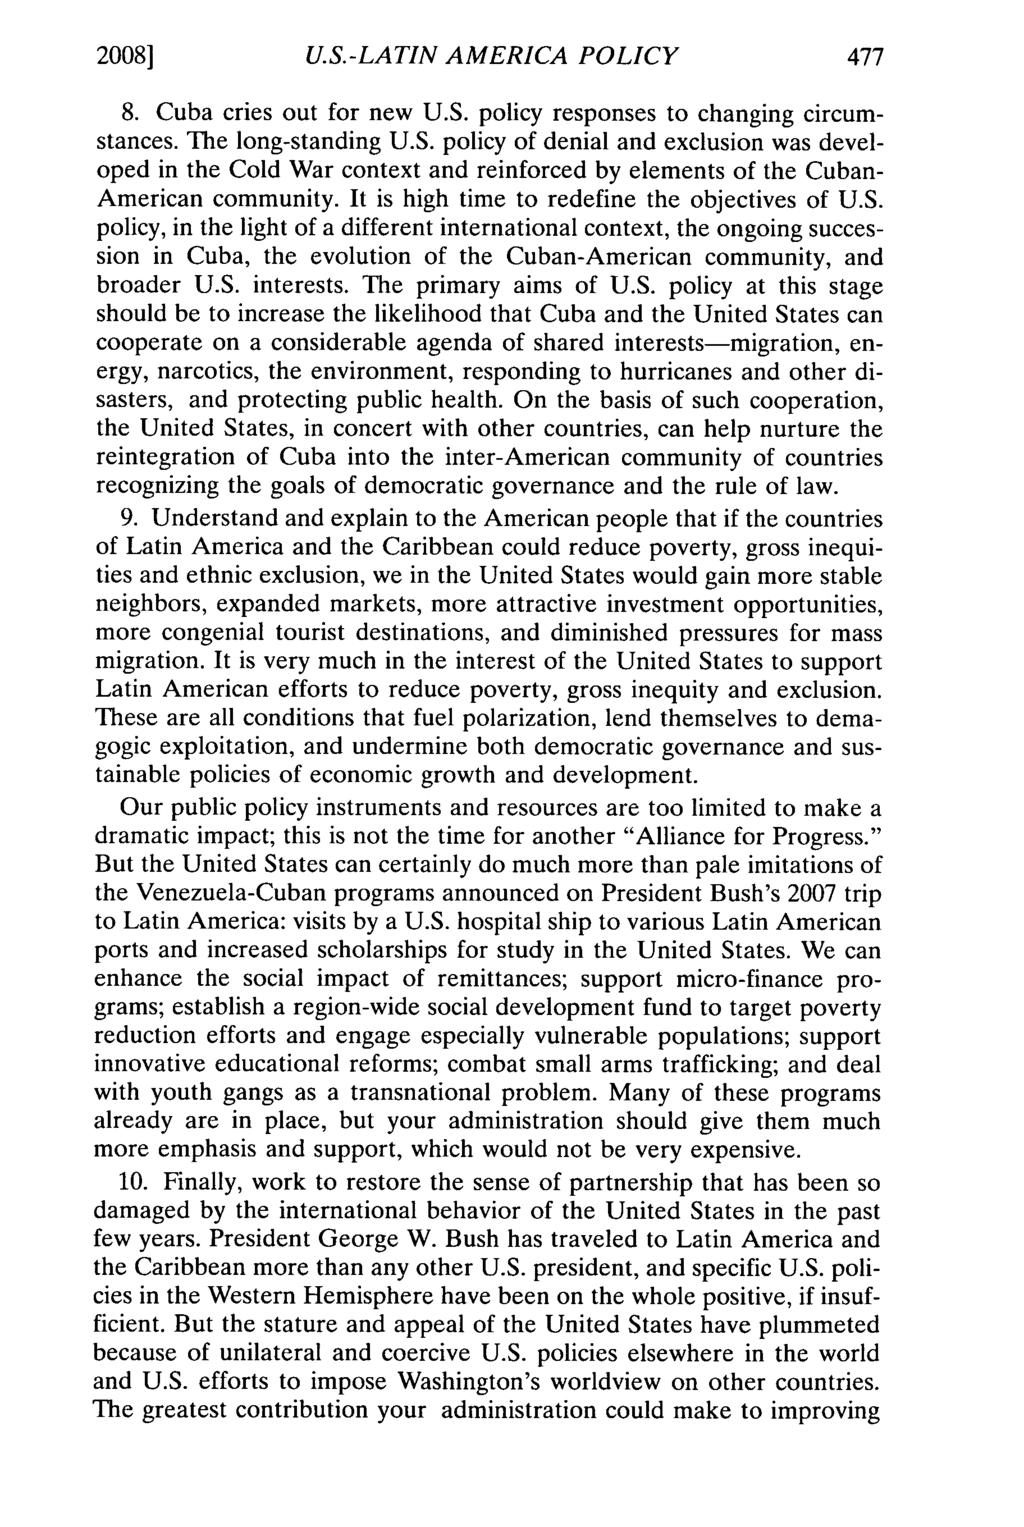 2008] U.S.-LATIN AMERICA POLICY 8. Cuba cries out for new U.S. policy responses to changing circumstances. The long-standing U.S. policy of denial and exclusion was developed in the Cold War context and reinforced by elements of the Cuban- American community.